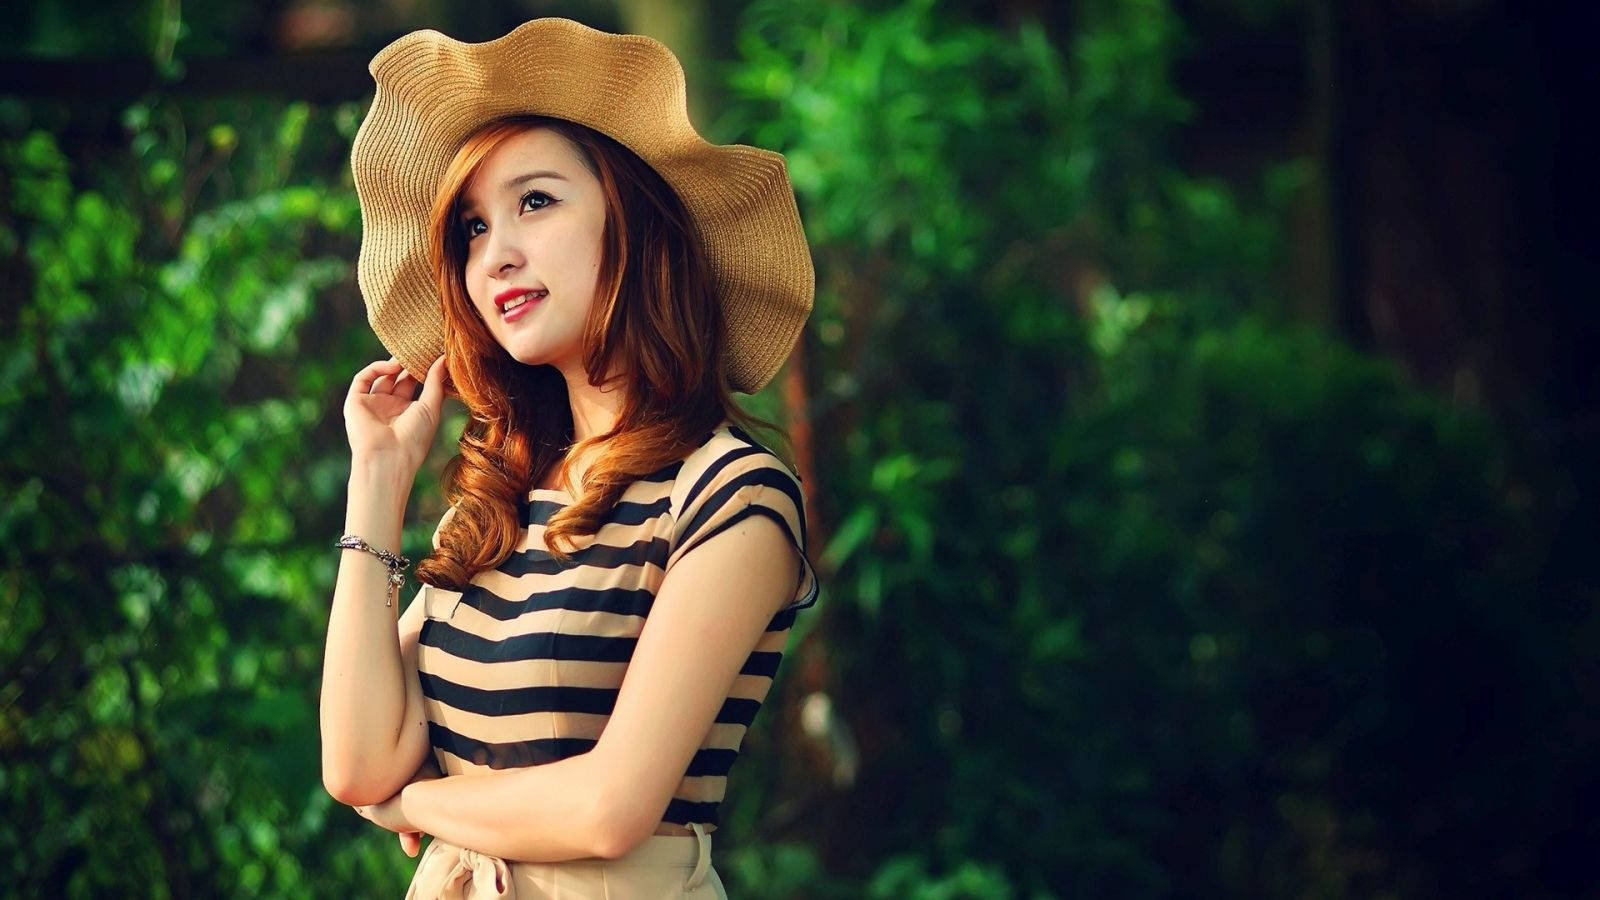 Beautiful Girl In A Sun Hat Picture